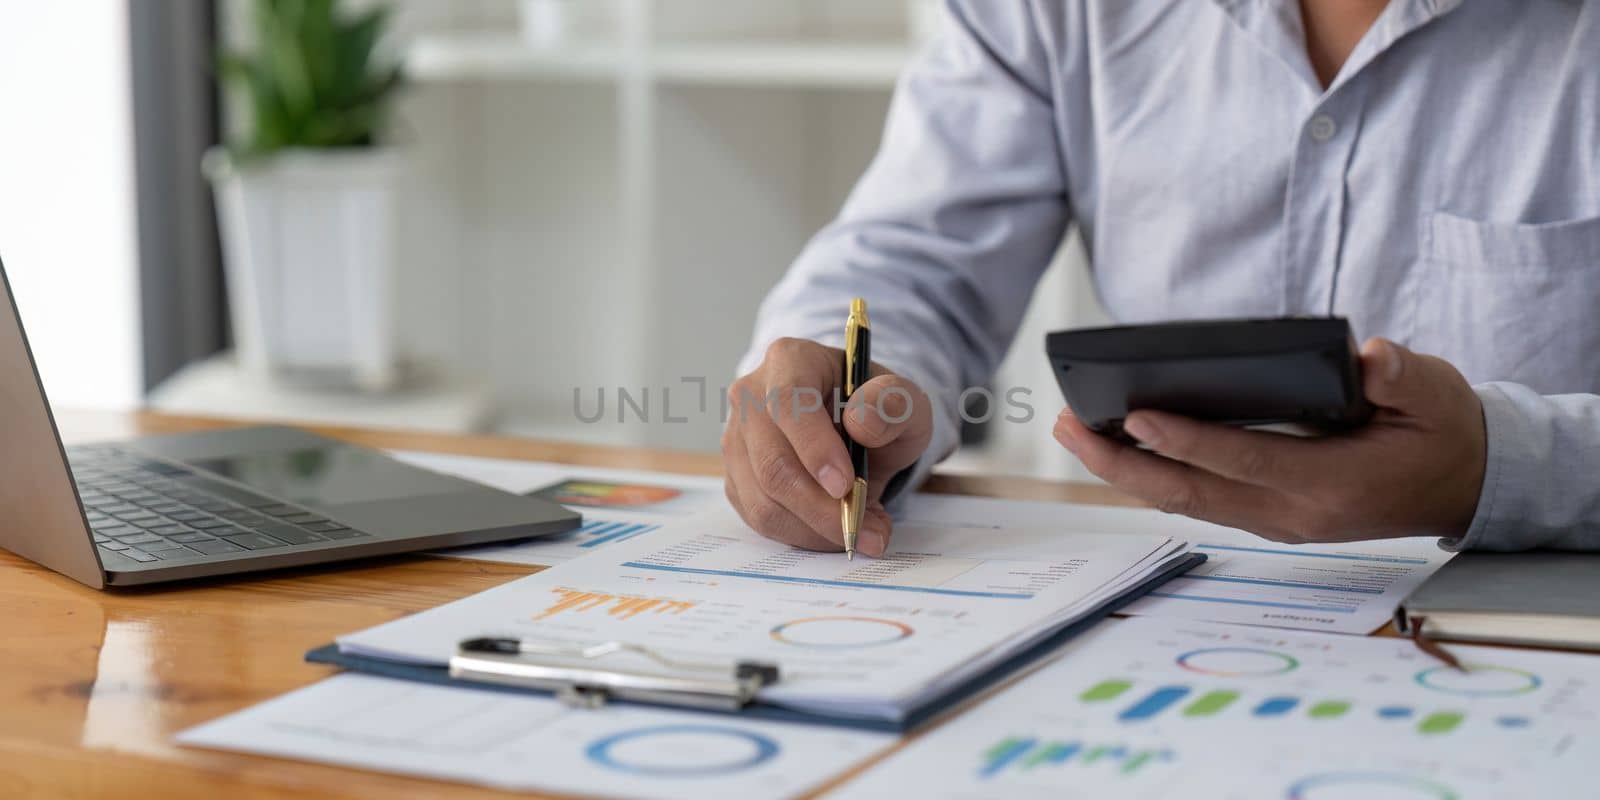 Bookkeeper or financial inspector hands making report, calculating or checking balance. Home finances, investment, economy, saving money or insurance concept.